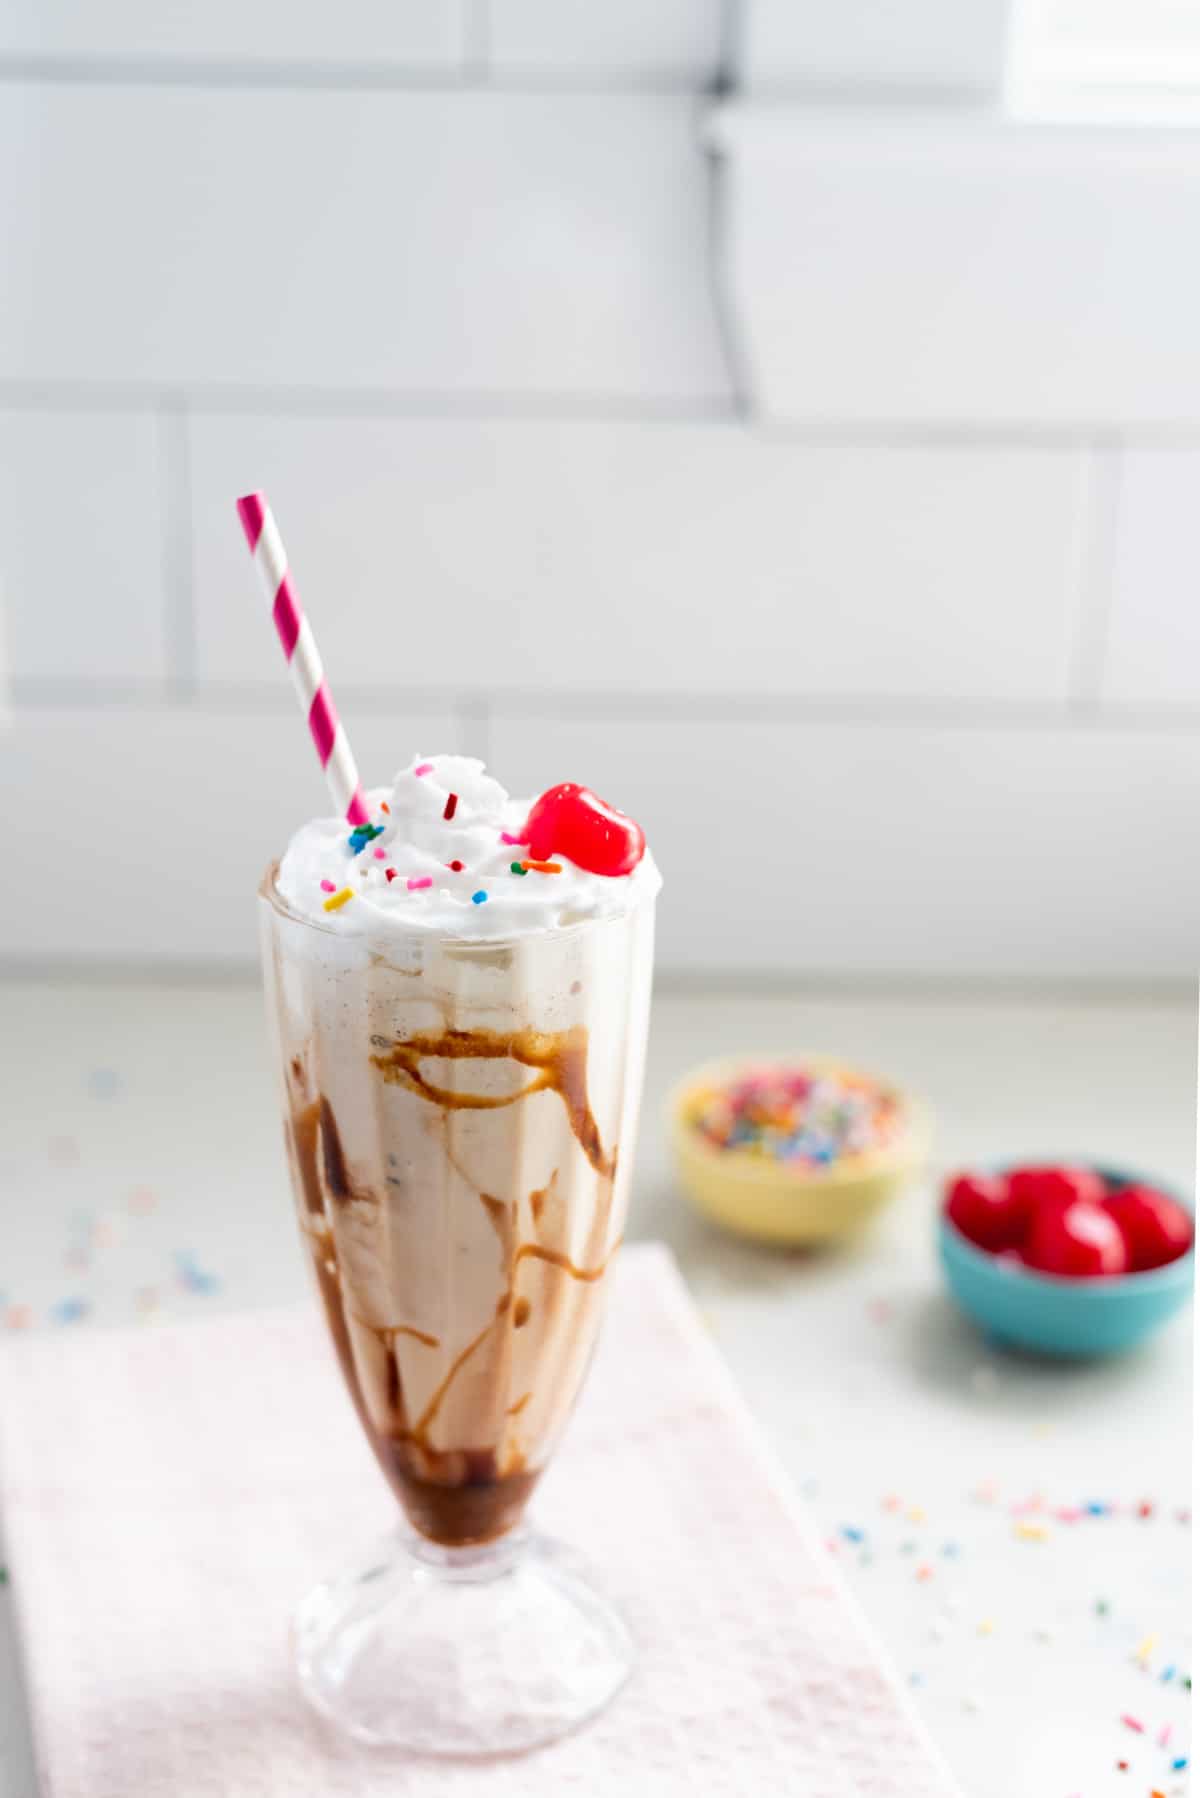 Far-away shot of a vegan vanilla milkshake with a pink and white striped straw. Topped with whipped cream, sprinkles, and a cherry. Extra sprinkles and cherries in the background.